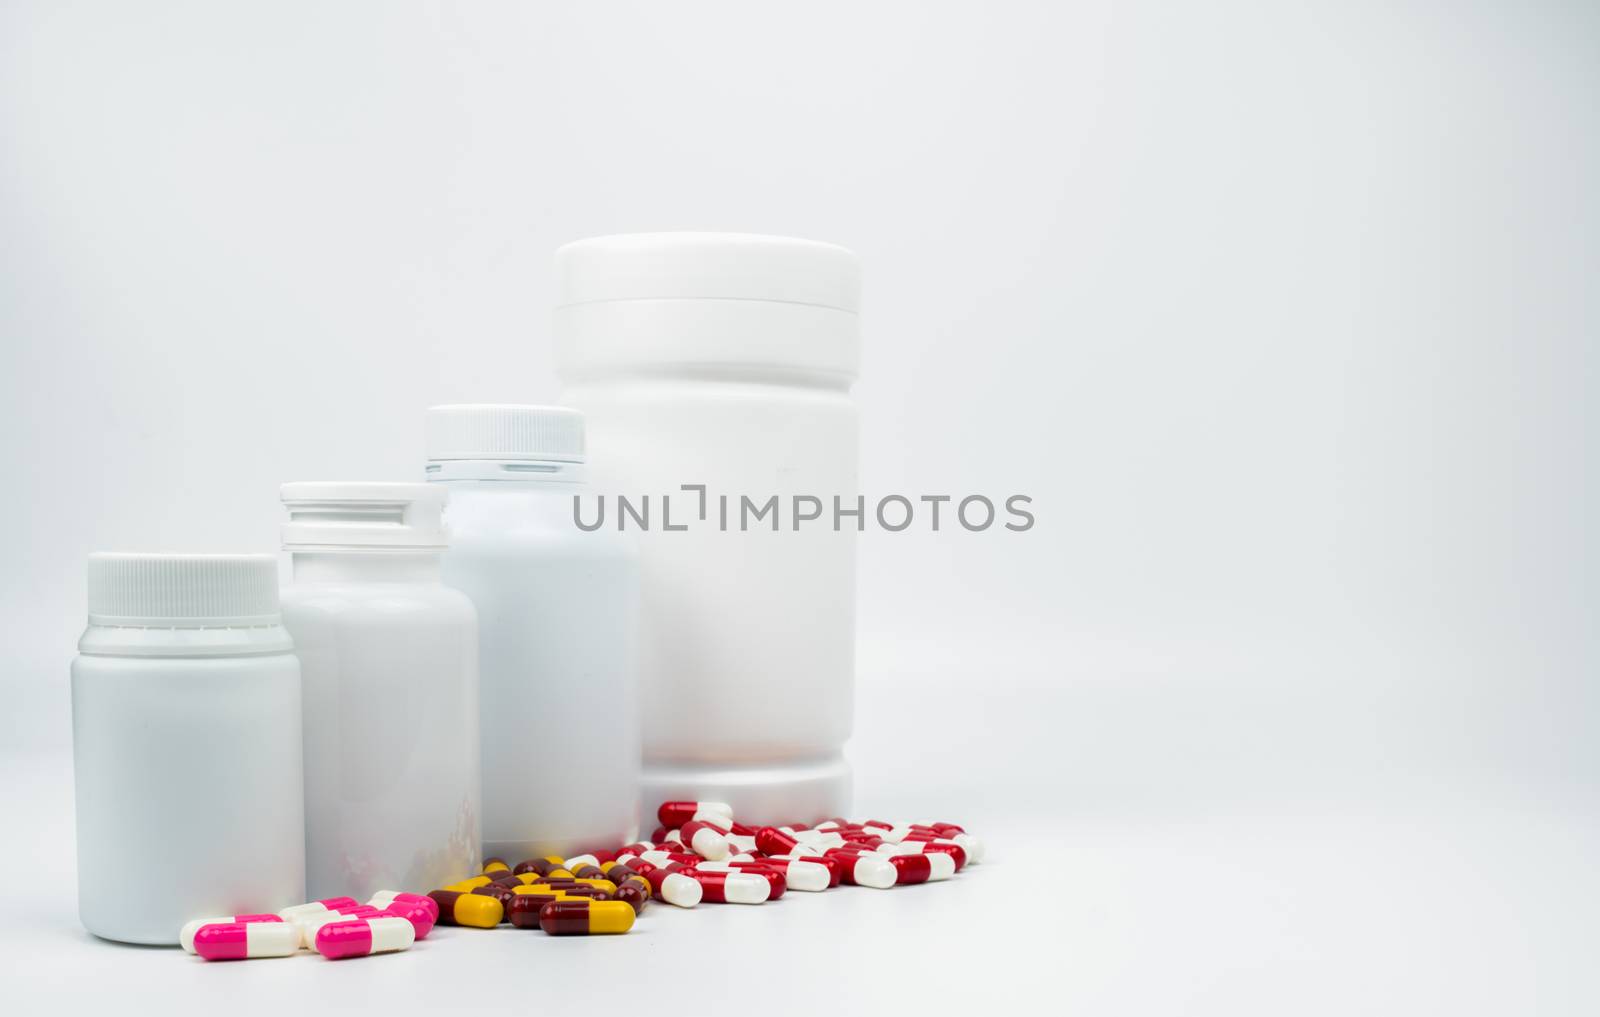 Antibiotic capsules pills and plastic bottle with blank label is by Fahroni